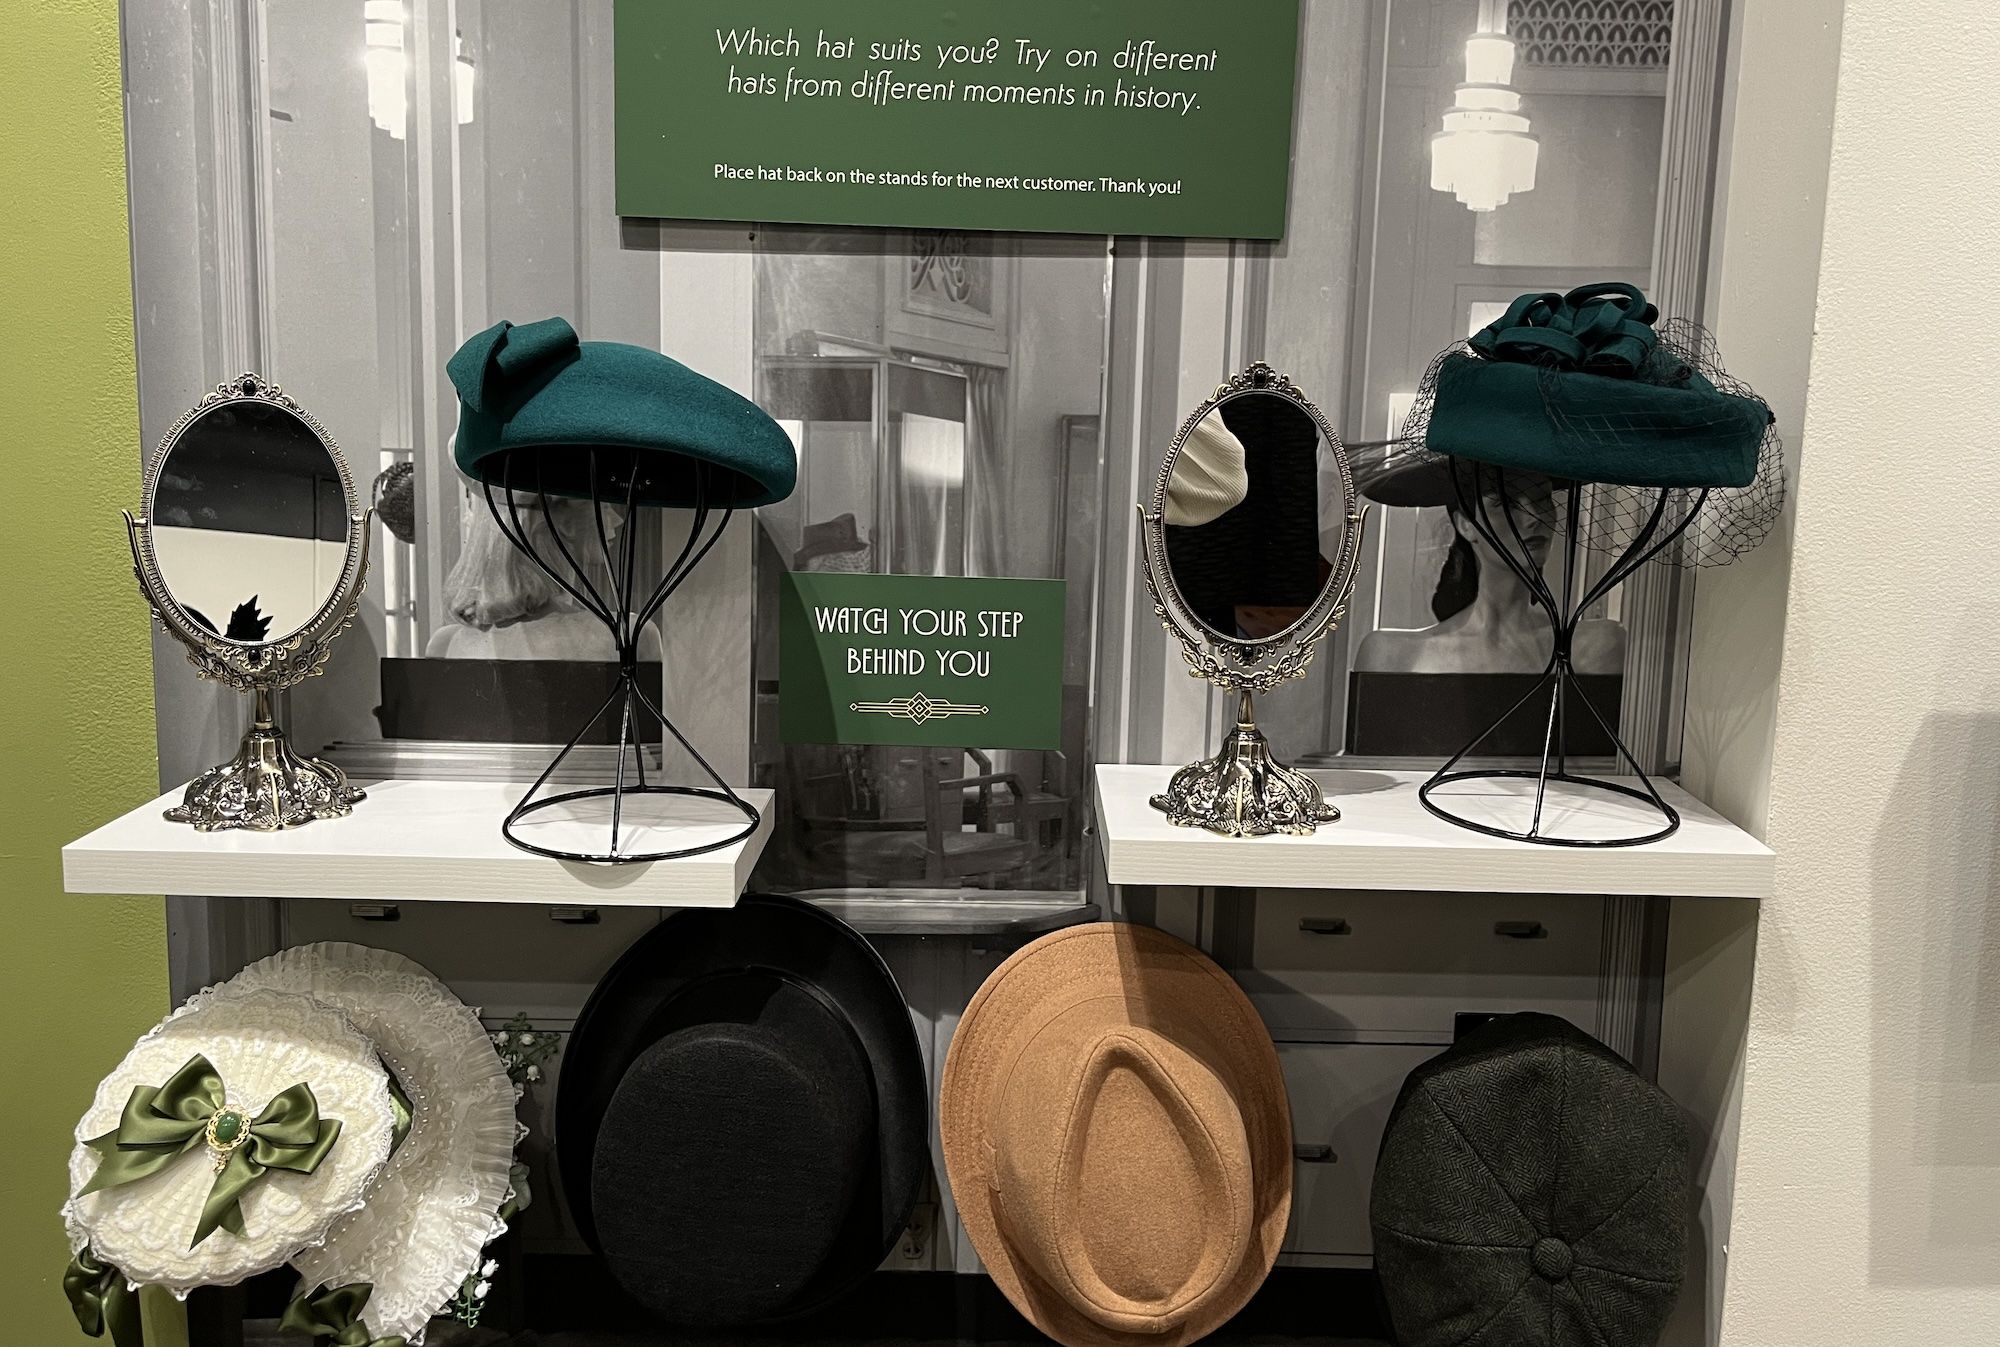 Mirrors and hats on stands on shelves.